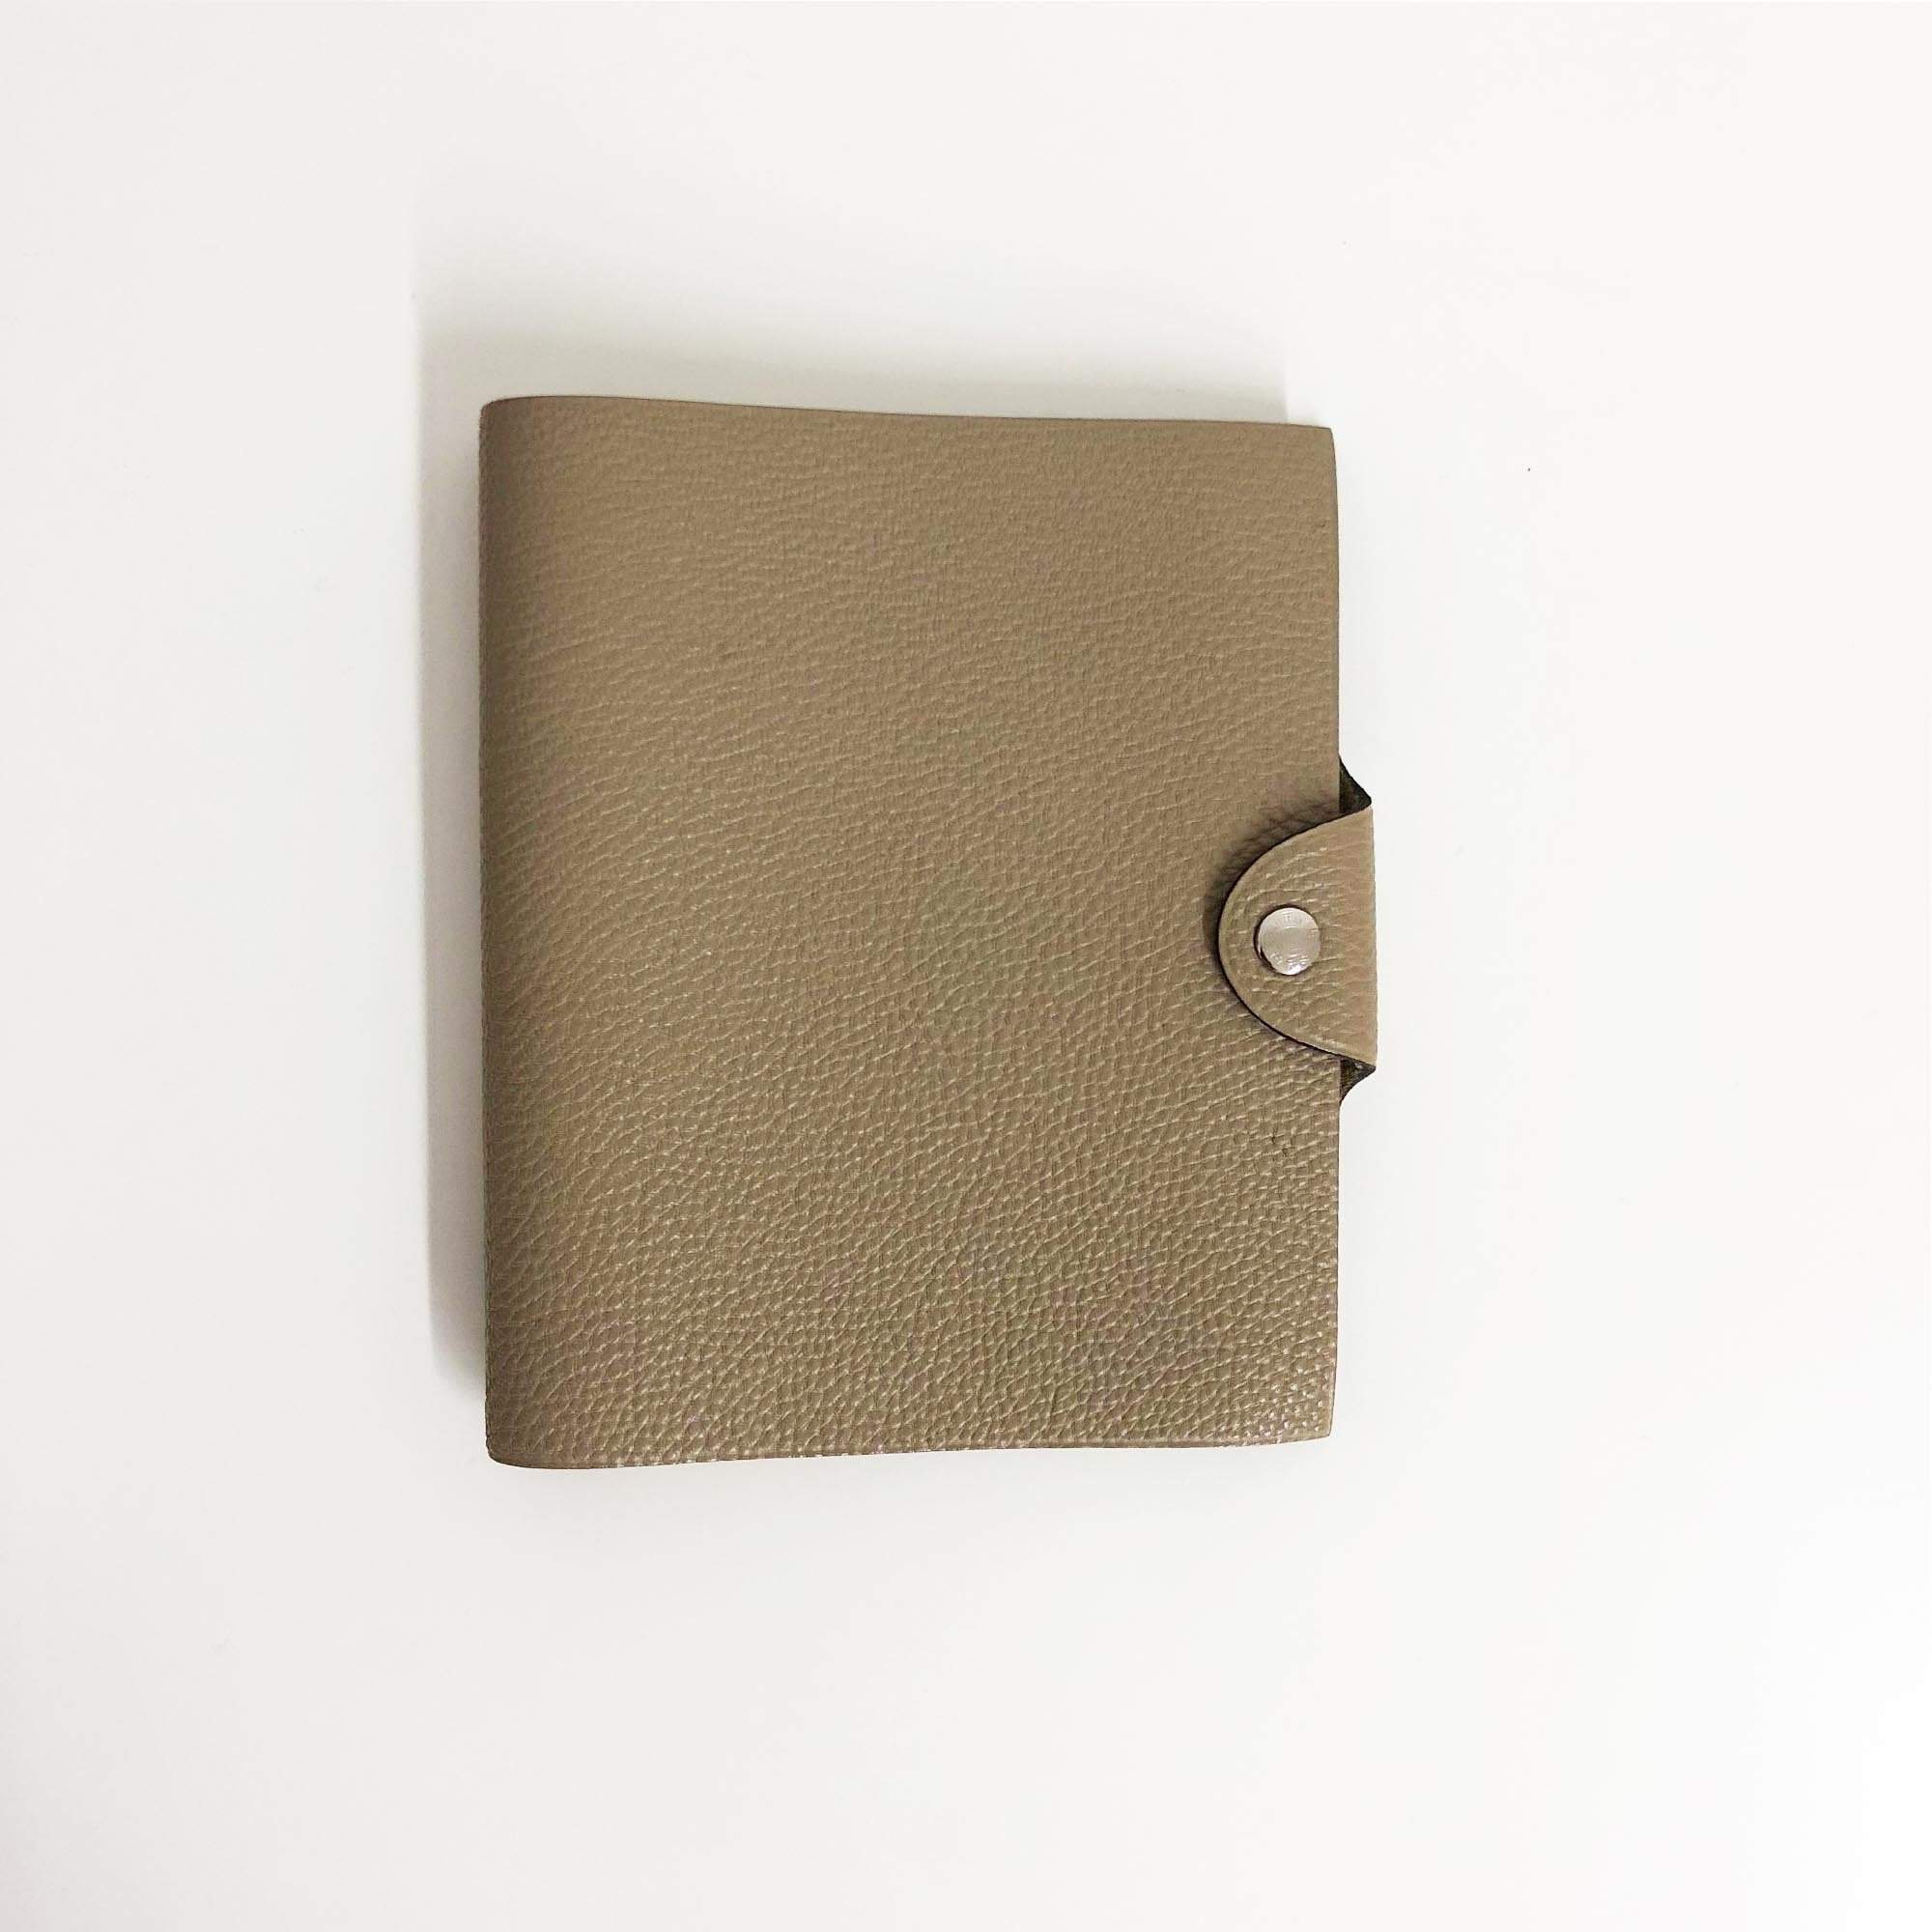 Hermes Ulysse Notebook Cover Taupe PM Garderobe